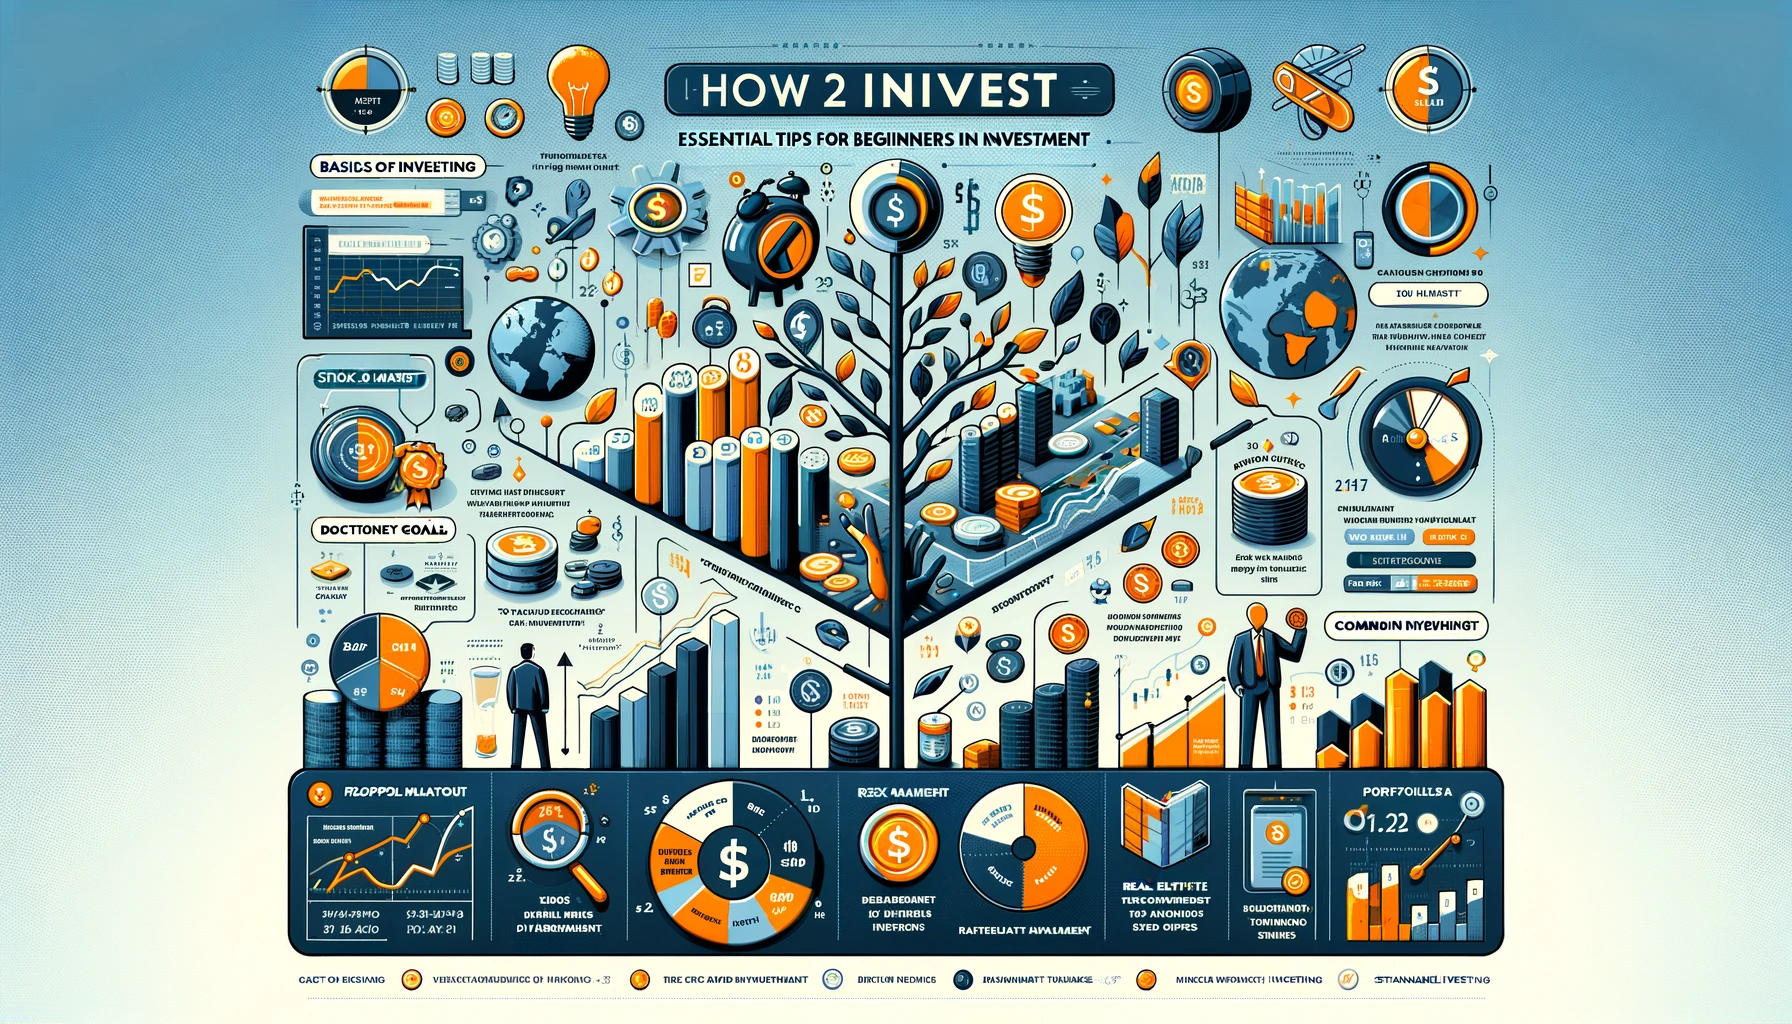 How2Invest: Essential Tips for Beginners in Investment